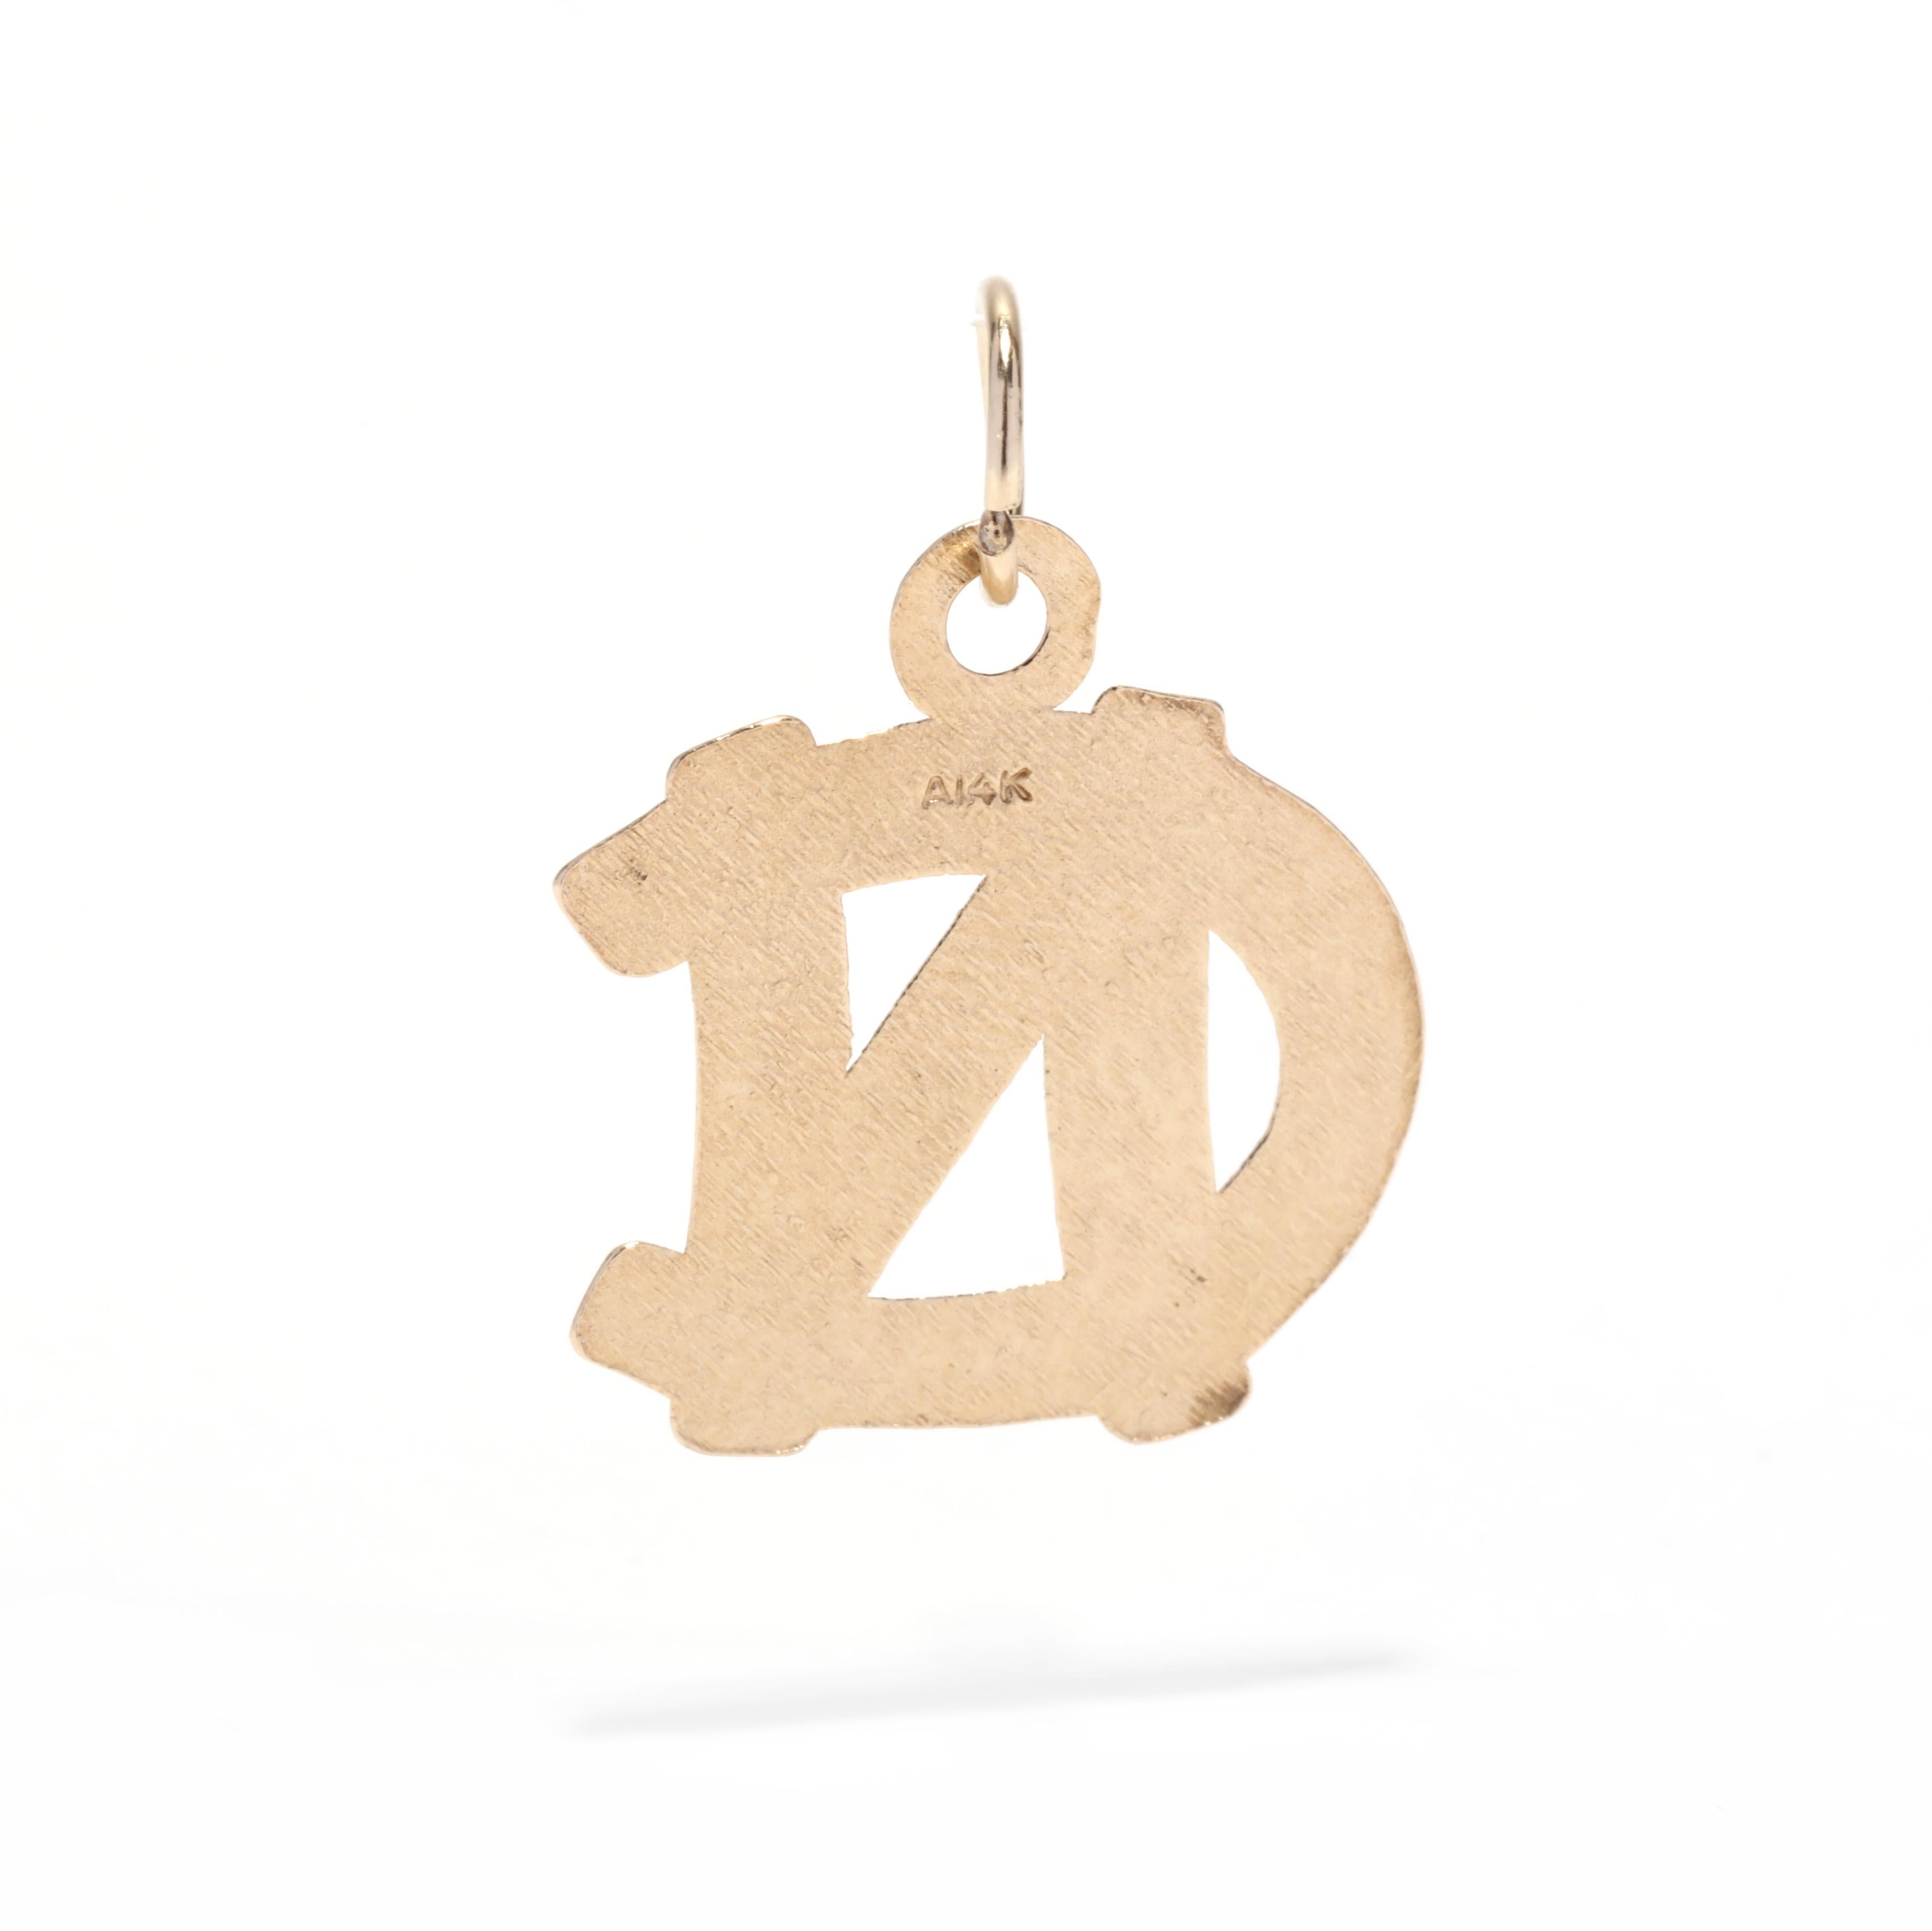 A vintage 14 karat yellow gold University of North Carolina at Chapel Hill charm. This charm features the NC emblem of the university with a polished finish and bevel edges. Perfect for a graduation gift!

Length: 7/8 in.

Width: 5/8 in.

Weight: